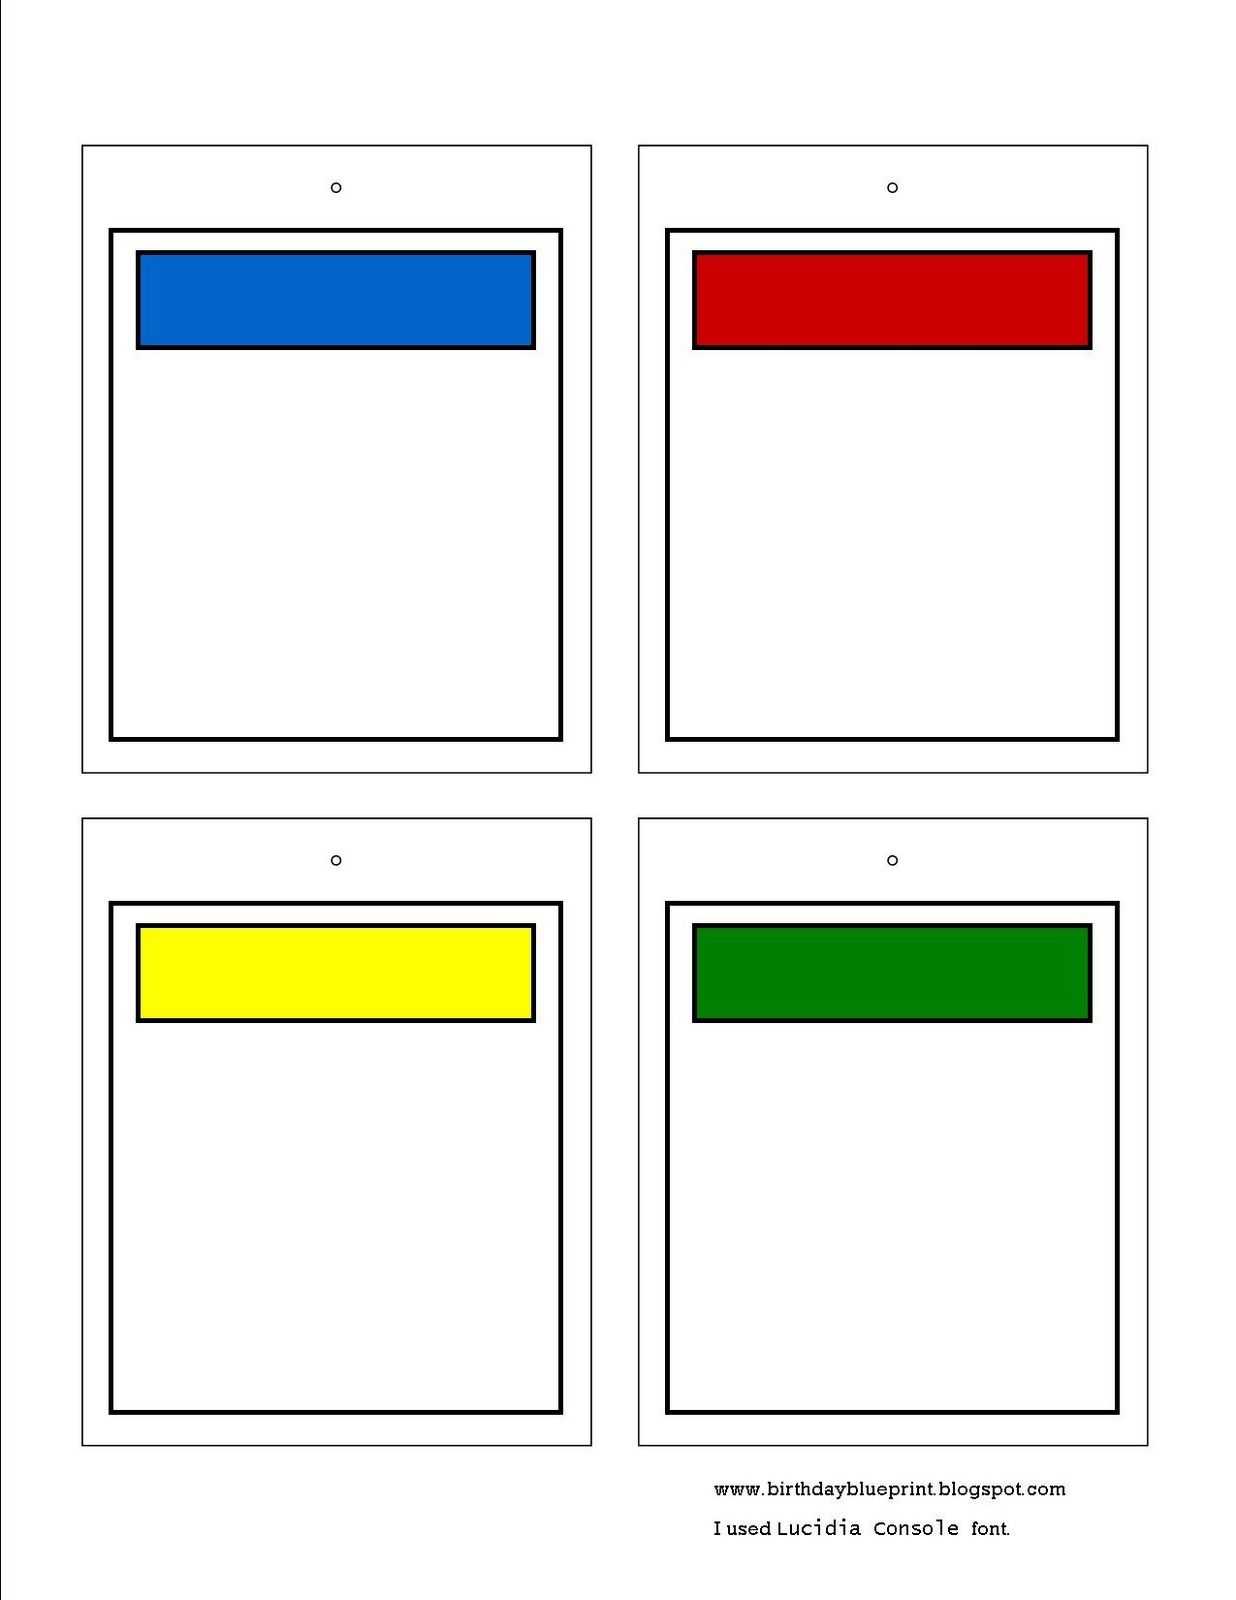 Blank Monopoly Property Cards. To Write In The Bible Memory Regarding Monopoly Property Card Template